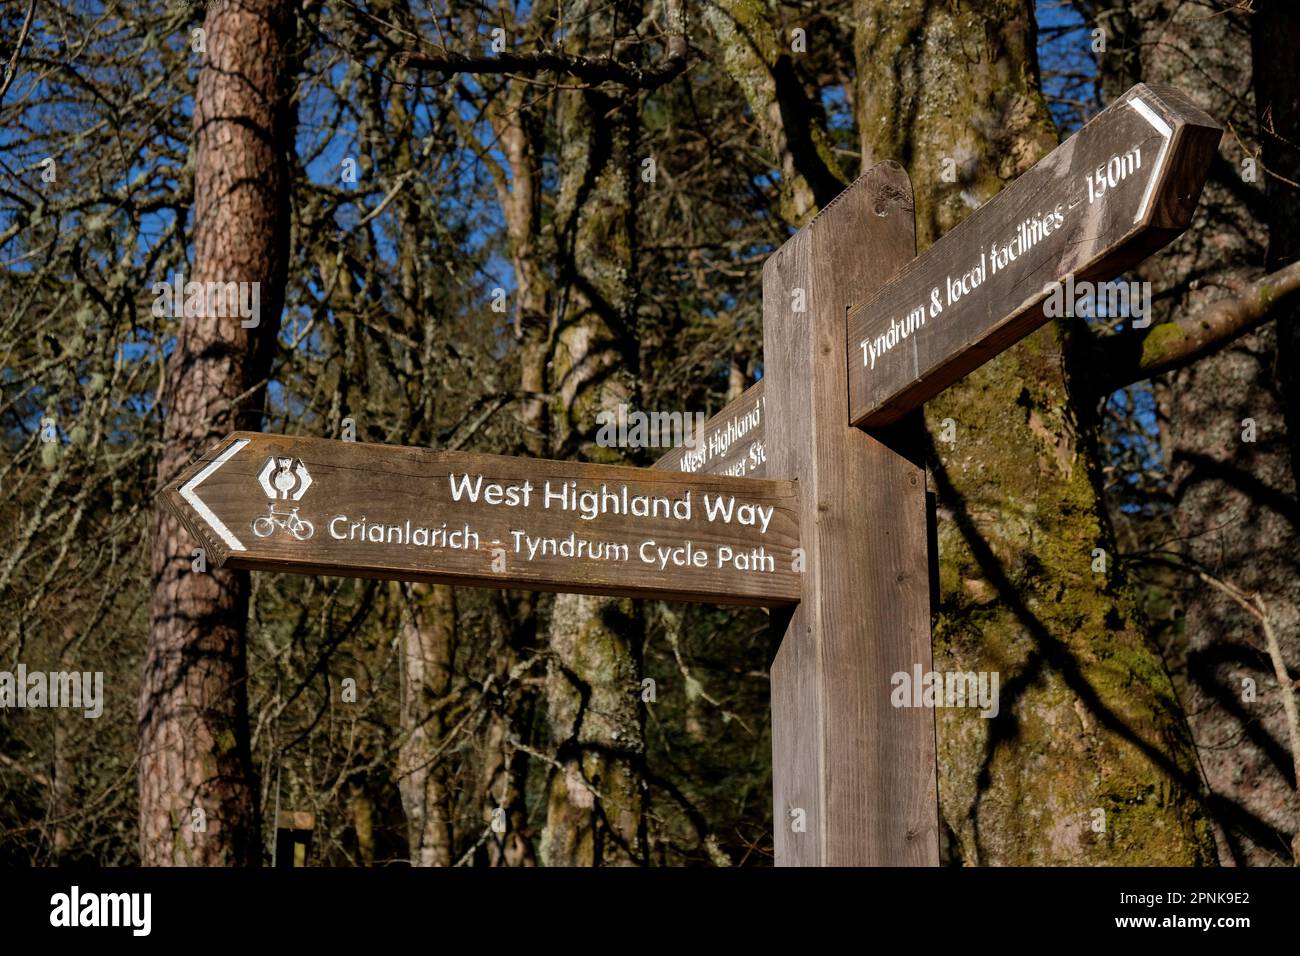 Fingerpost sign for the West Highland Way and the Tyndrum Cycle Path to Crianlarich, Tyndrum, Scotland Stock Photo